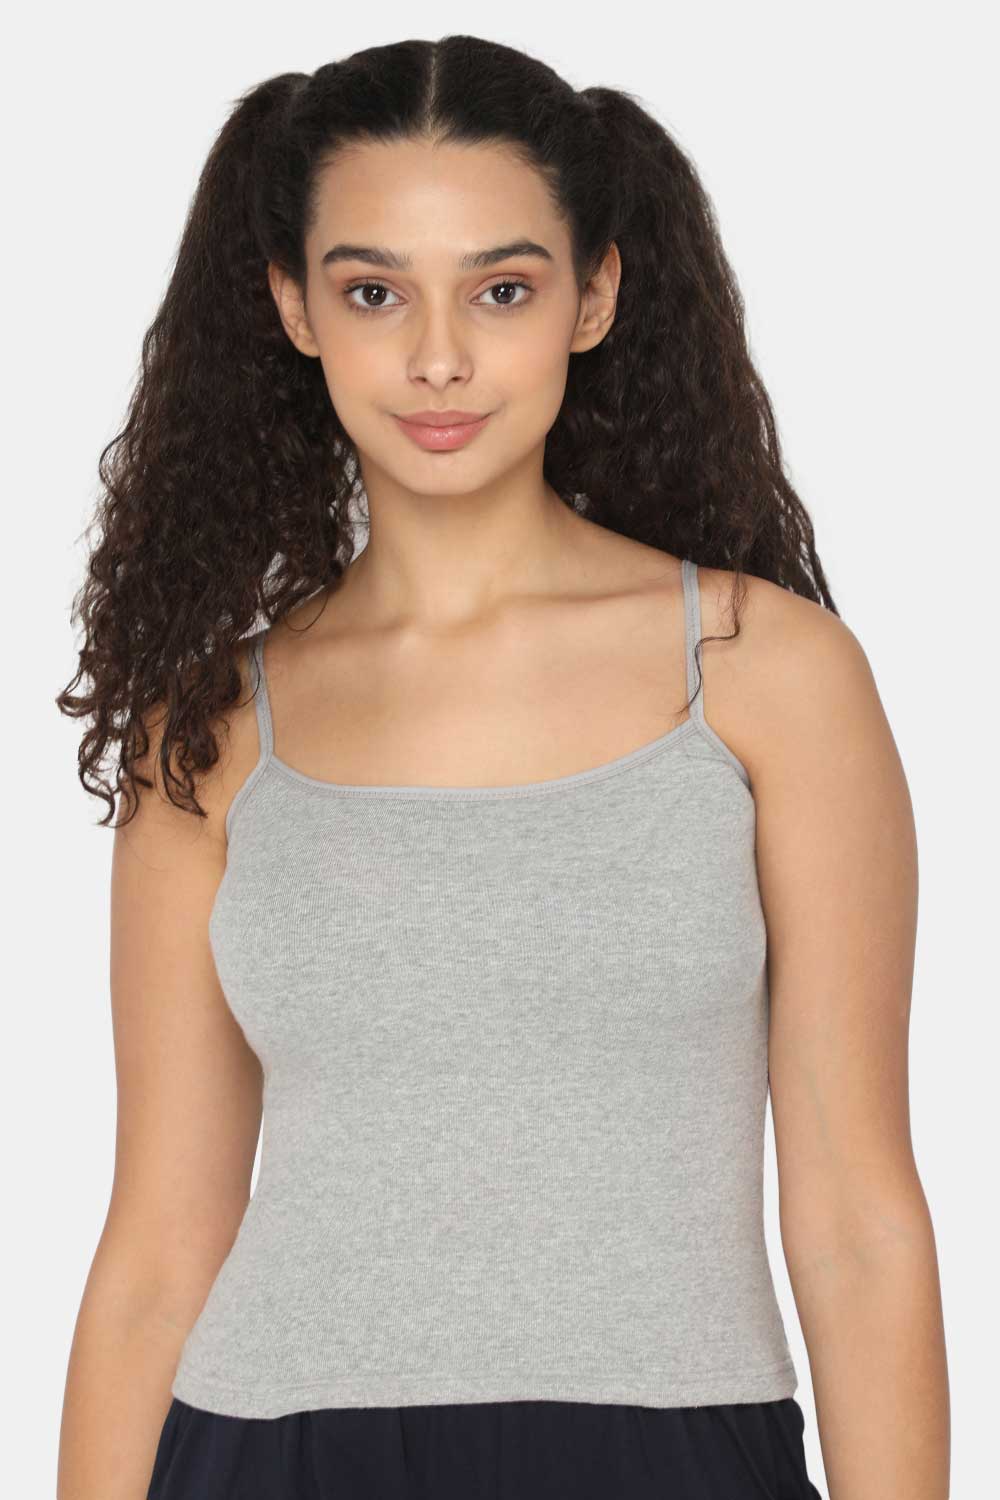 Intimacy Camisole-Slip Special Combo Pack - In02 - Pack of 3 - C56